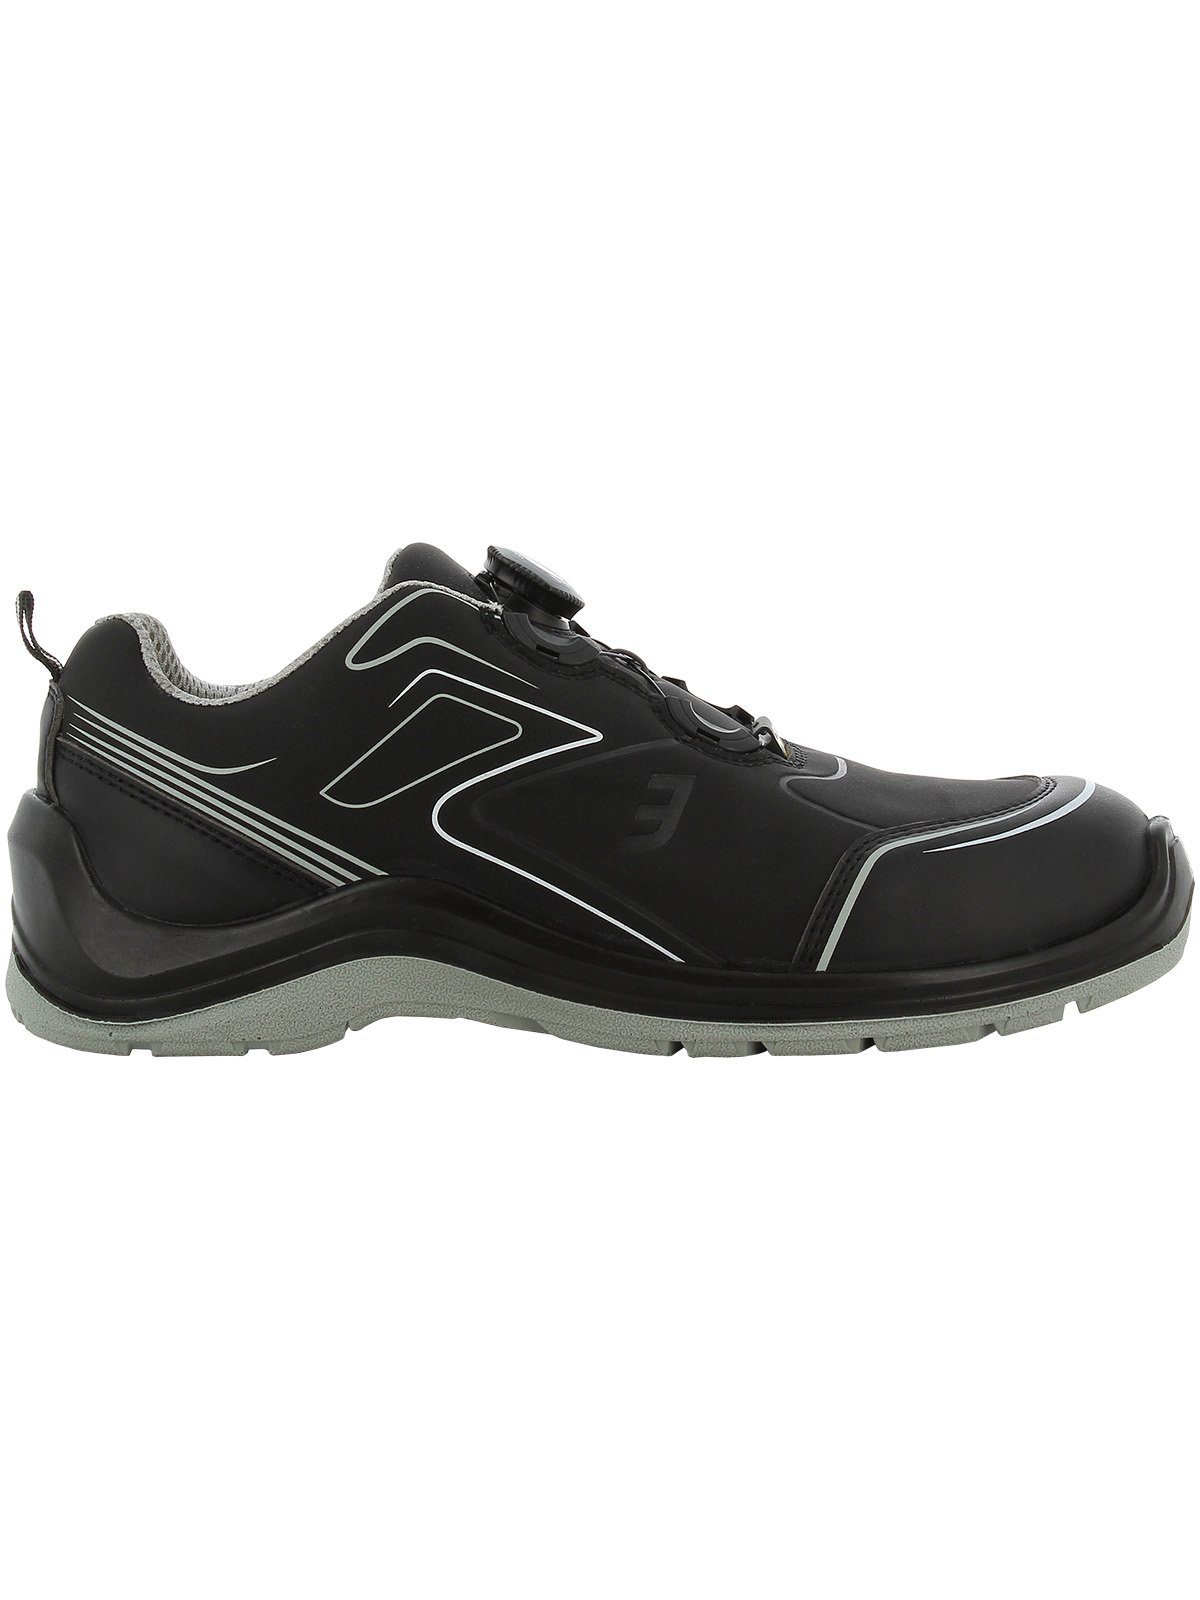 Safety Jogger SafetyJogger Flow Low S3 Arbeitsschuh